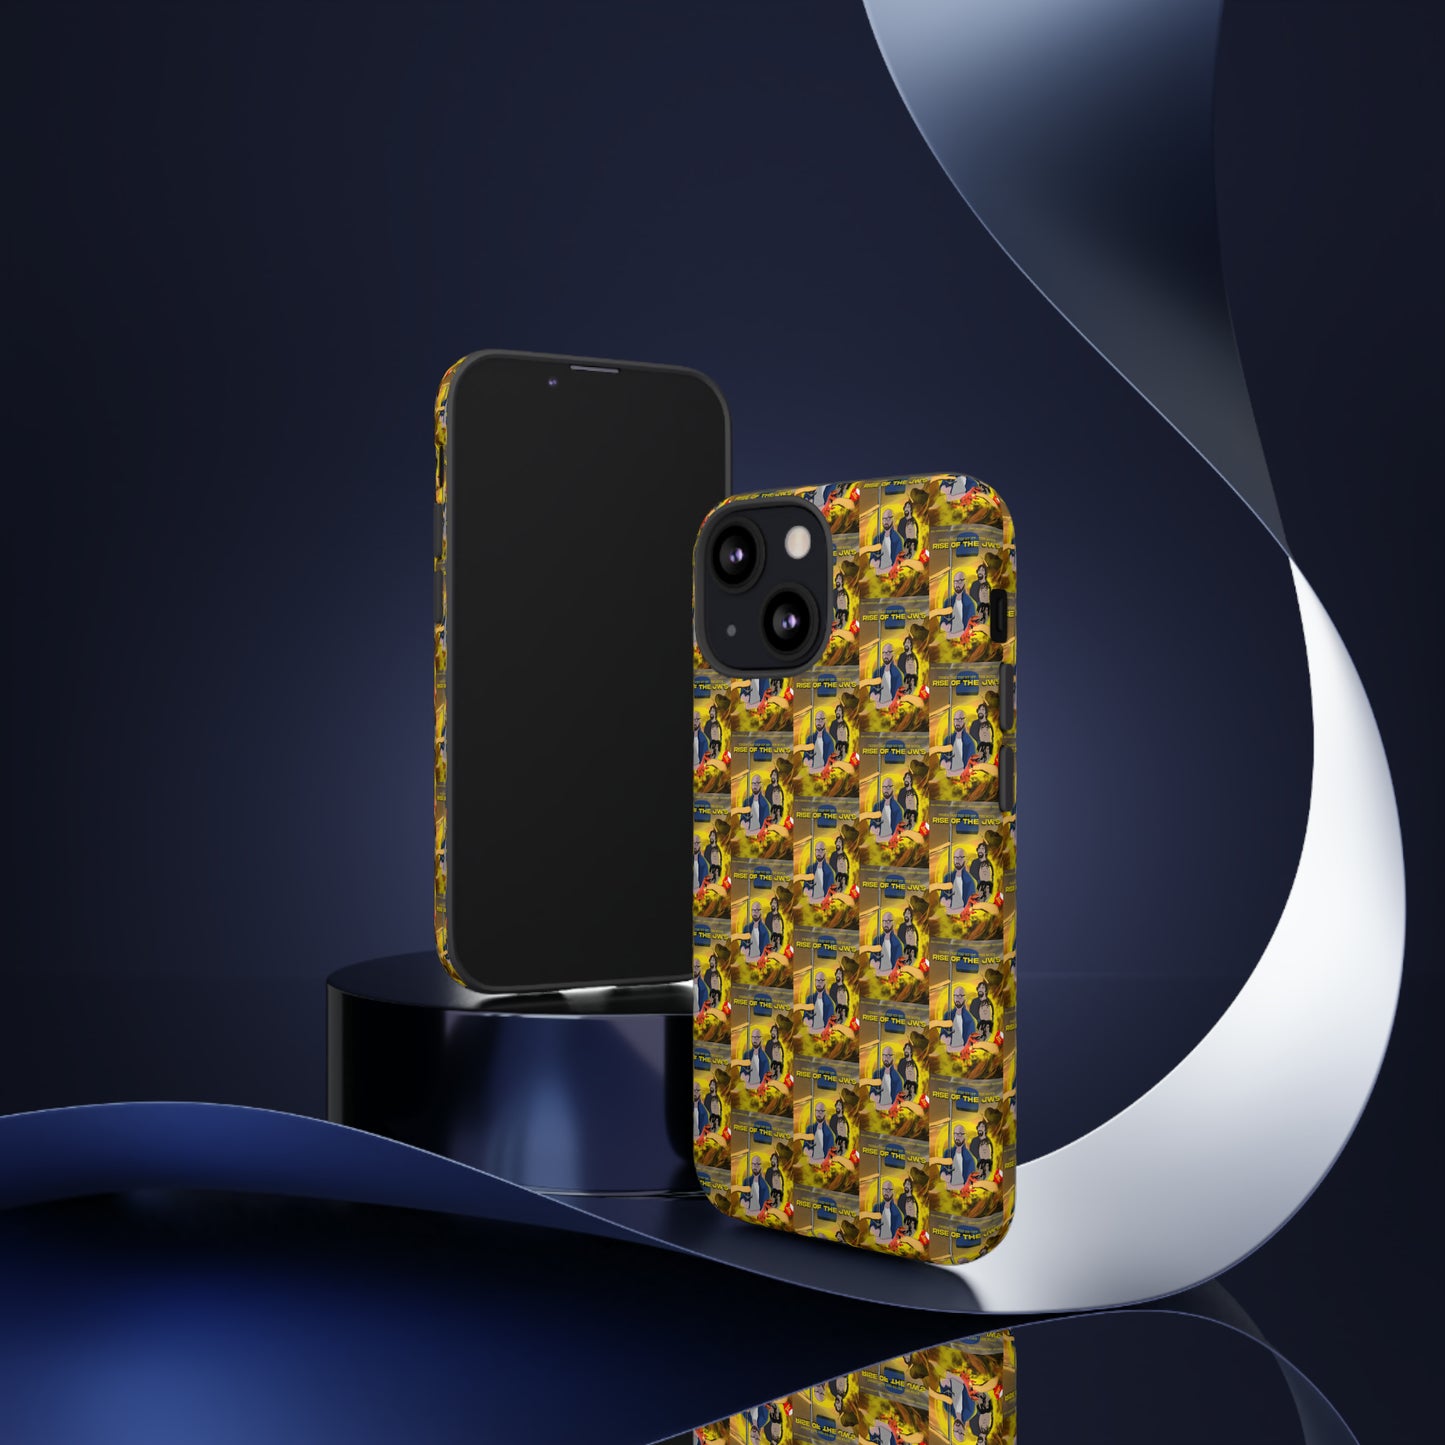 Rise Of The JW's Tough Phone Case (all over print)